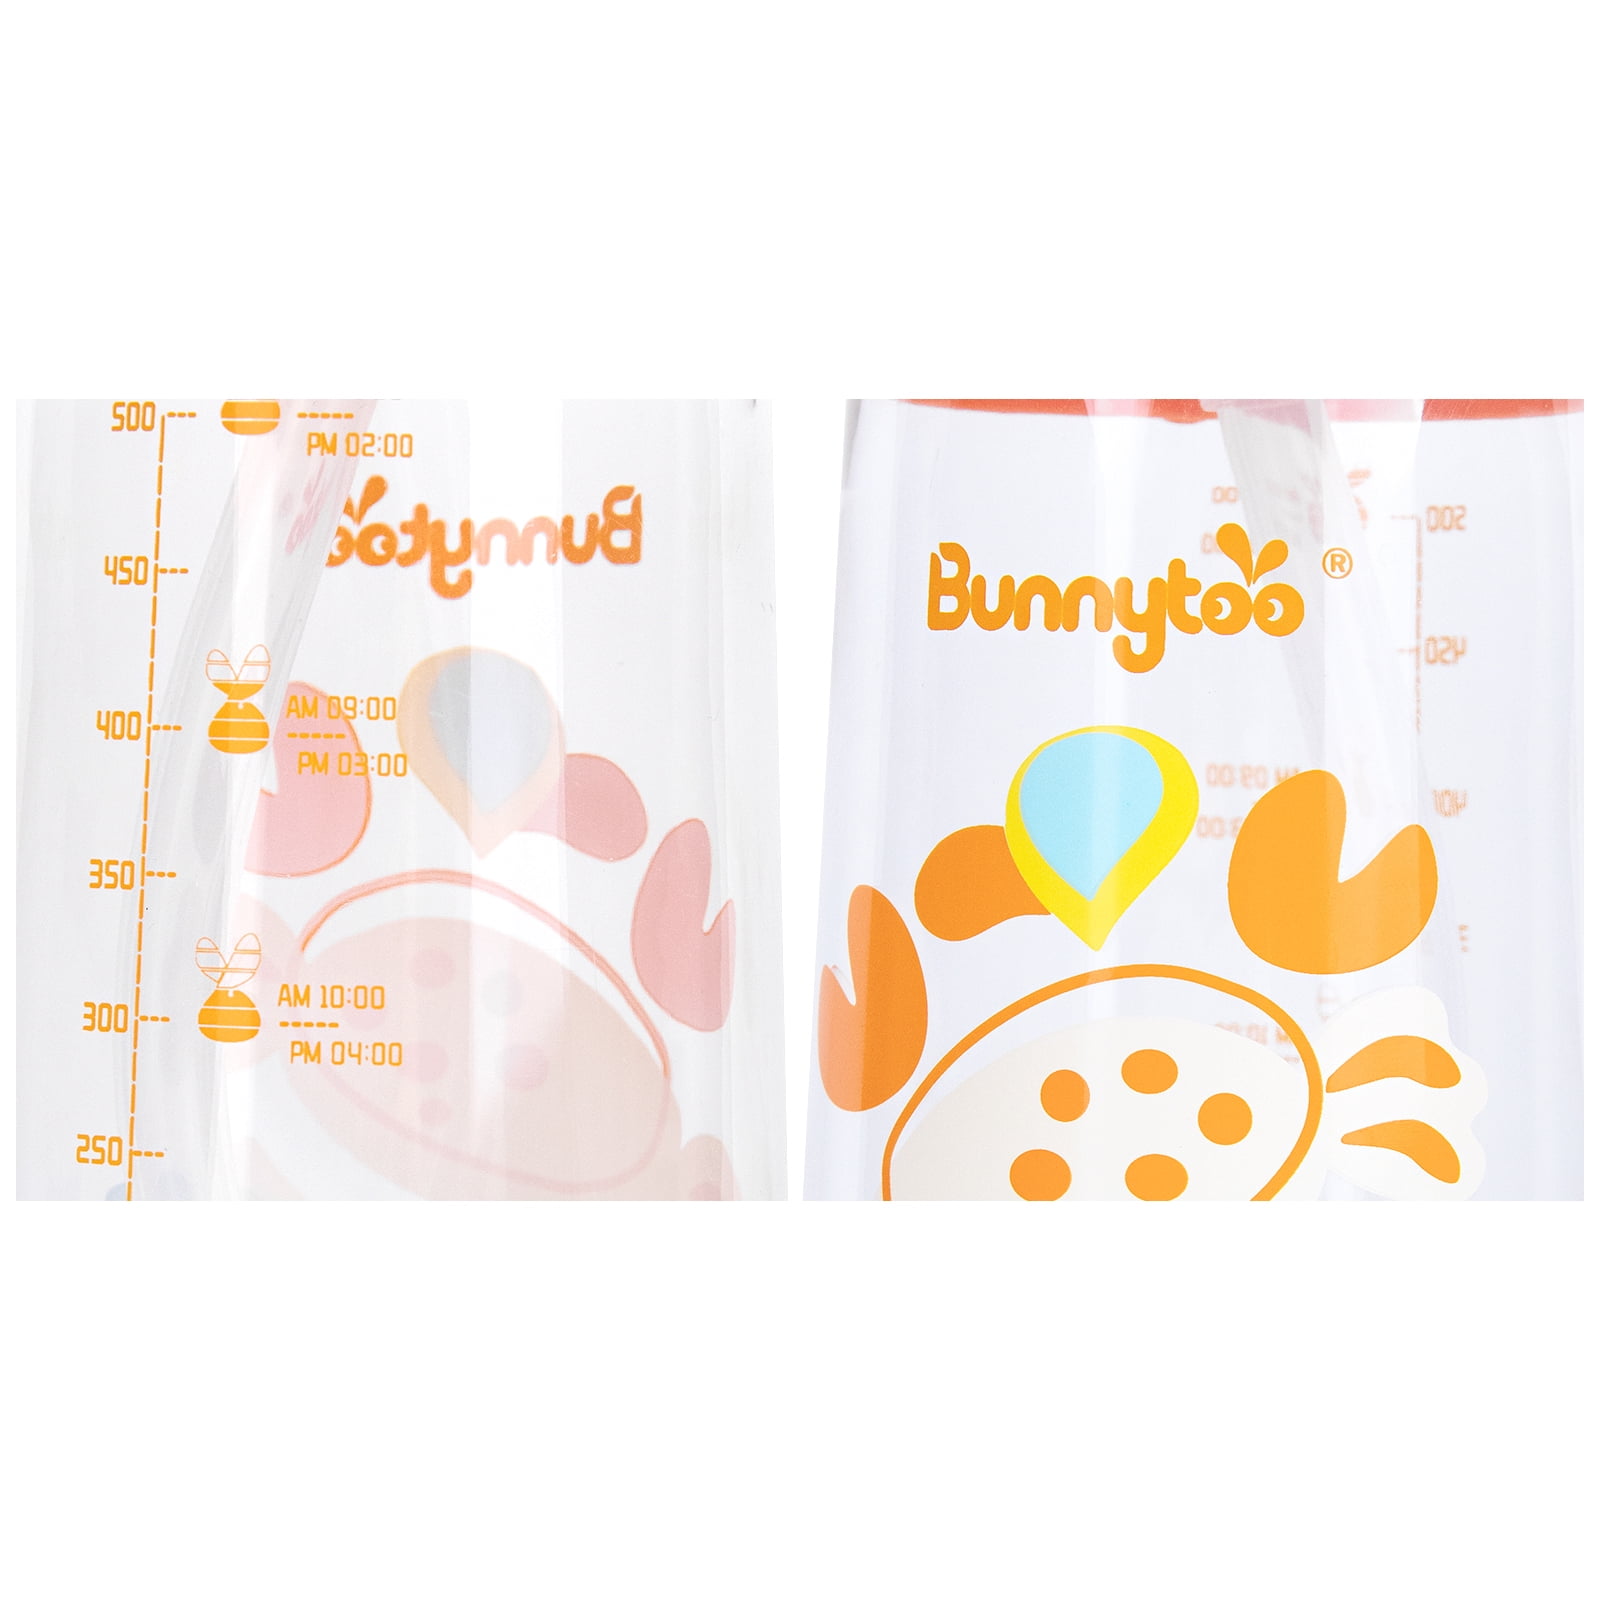 Bunnytoo Kids Water Bottle with Straw and Time Marker,16oz Reusable Travel  Cup with Shoulder Strap,Tritan&BPA Free,Soft Silicone Spout,Easy to